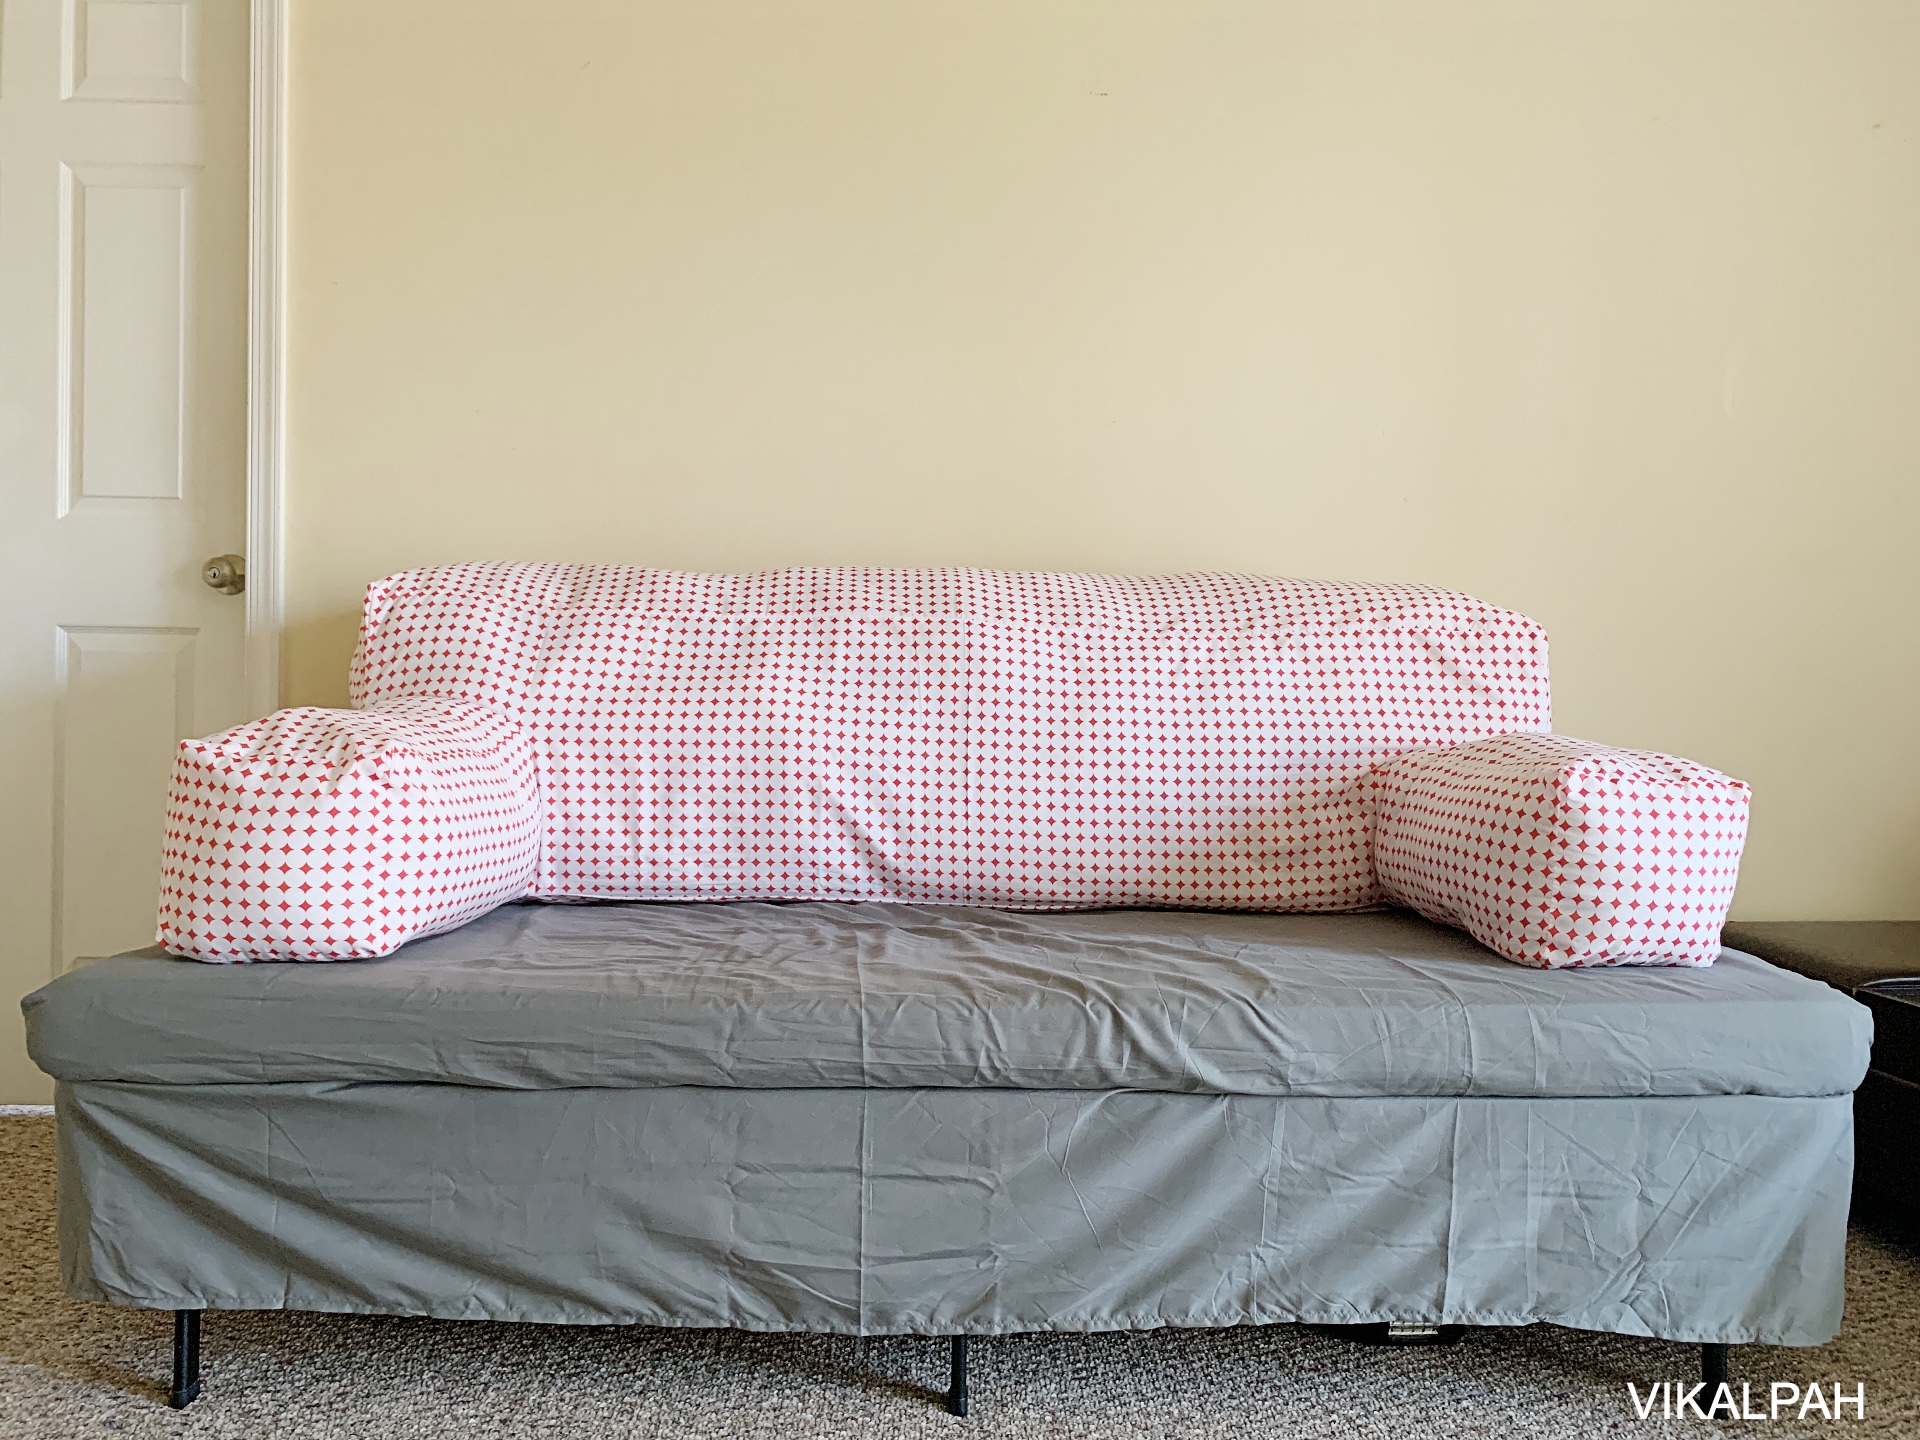 How To Convert A Twin Bed Into Couch, How To Make A Couch Out Of Twin Beds